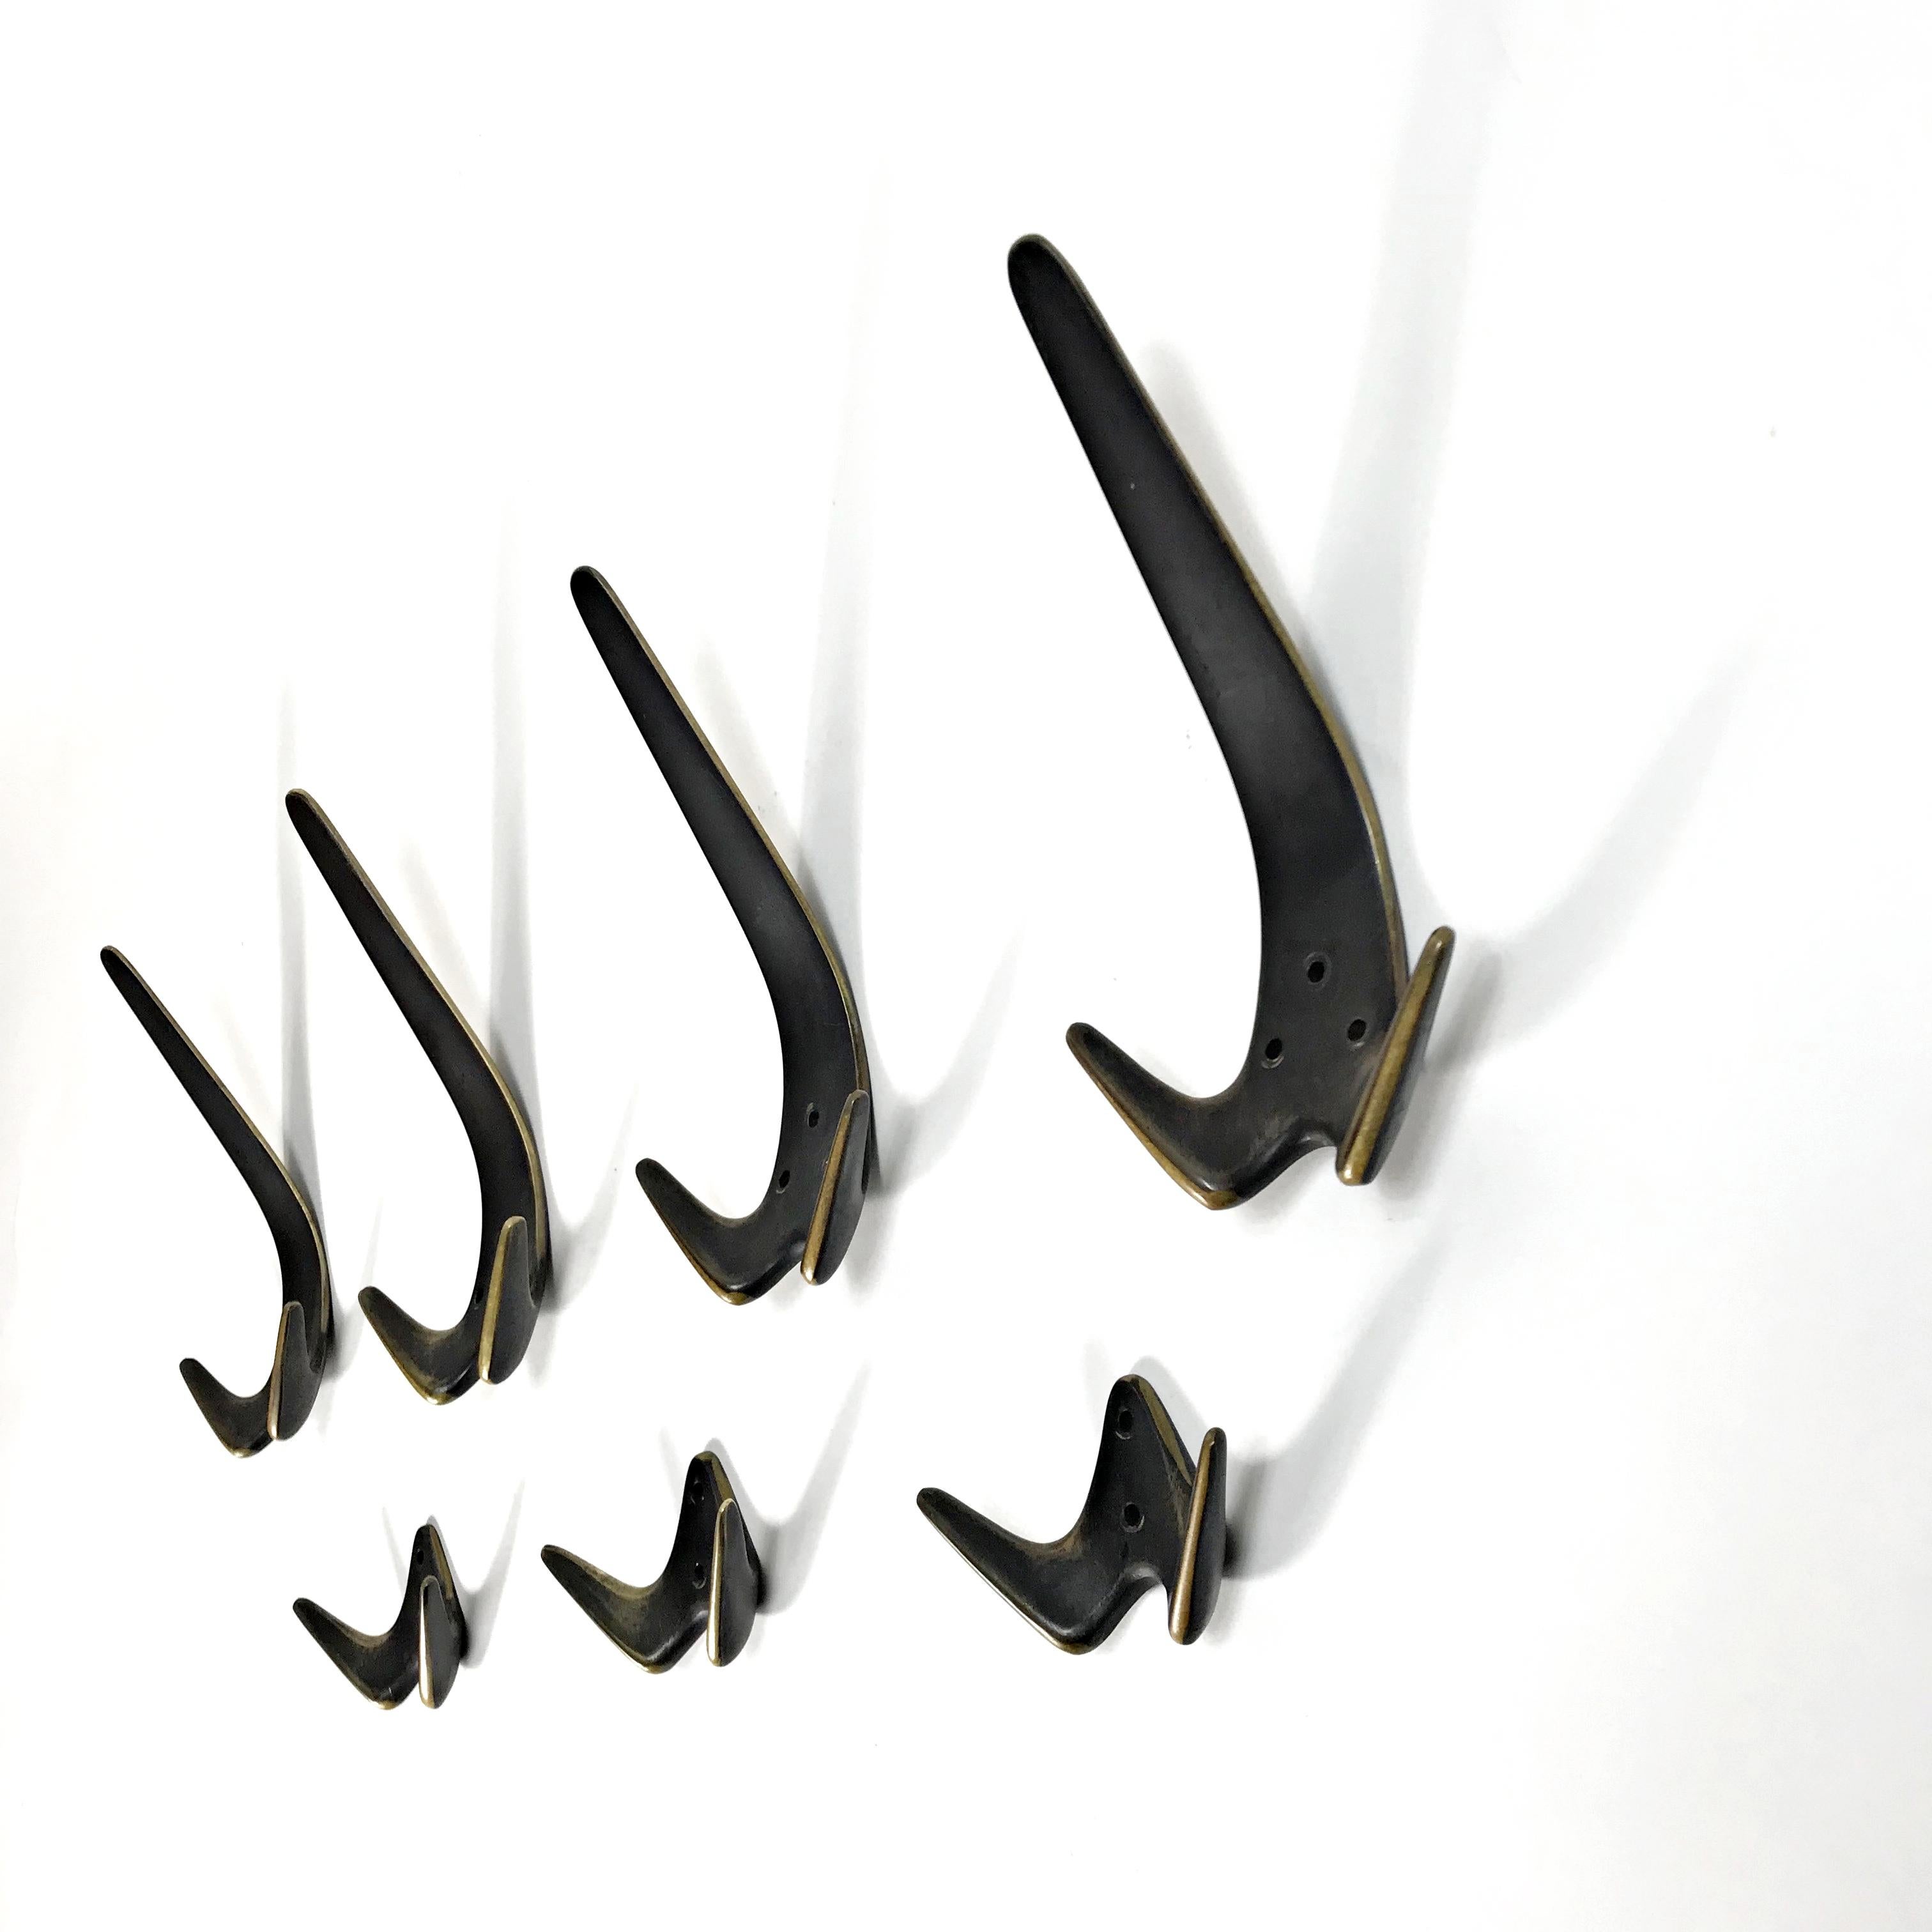 Mid-Century Modern Carl Auböck Midcentury Patinated Brass Wall Coat Hooks, 1950s, Austria For Sale